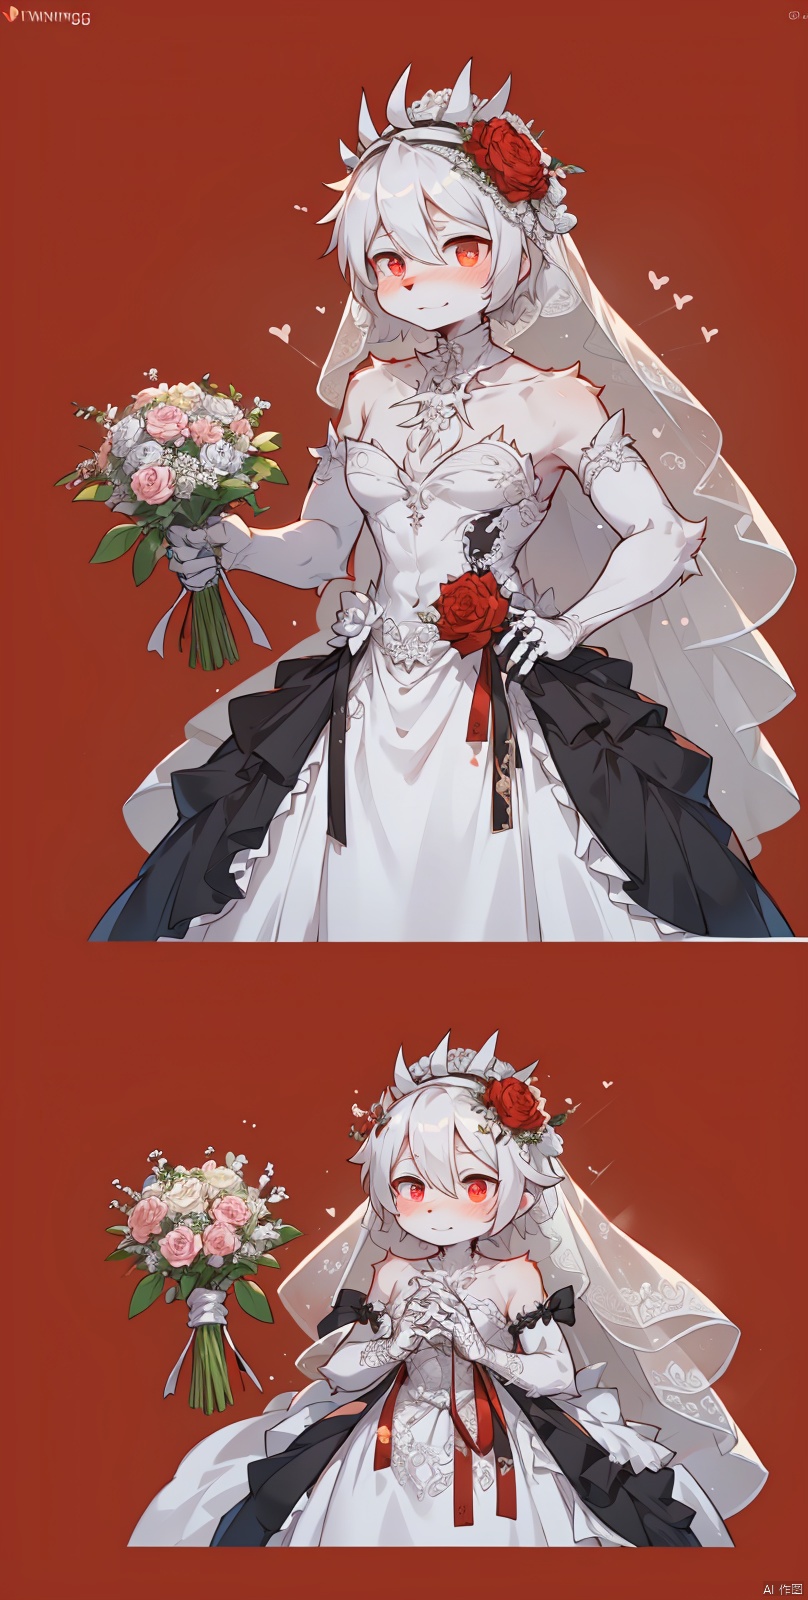  Skeleton Bride, Holding flowers in the hand, Wearing a wedding dress, Wait at the cemetery, So many details., hell, blackmagic, macron, solid eyes, xinniang, cutegui, wulian, red background, shota, furry